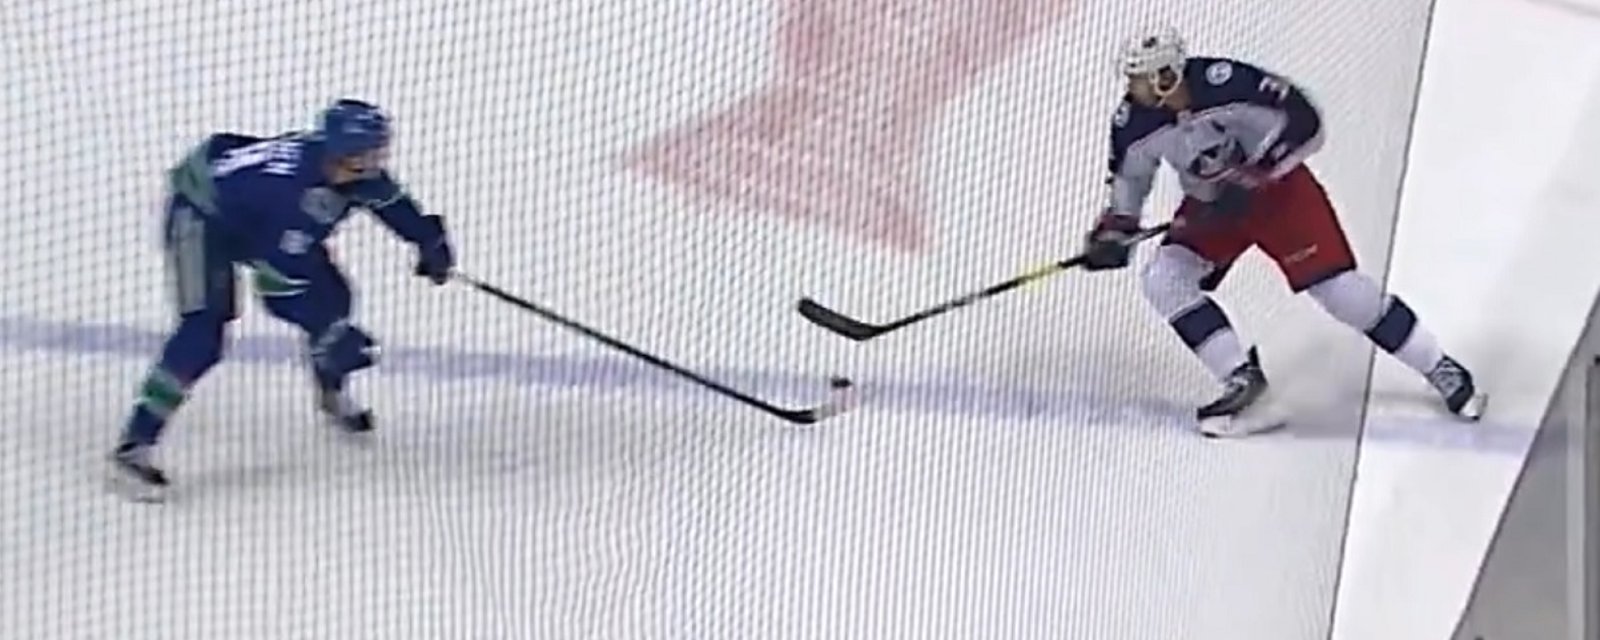 Jake Virtanen's hit misses Seth Jones and sends him face first into the boards.